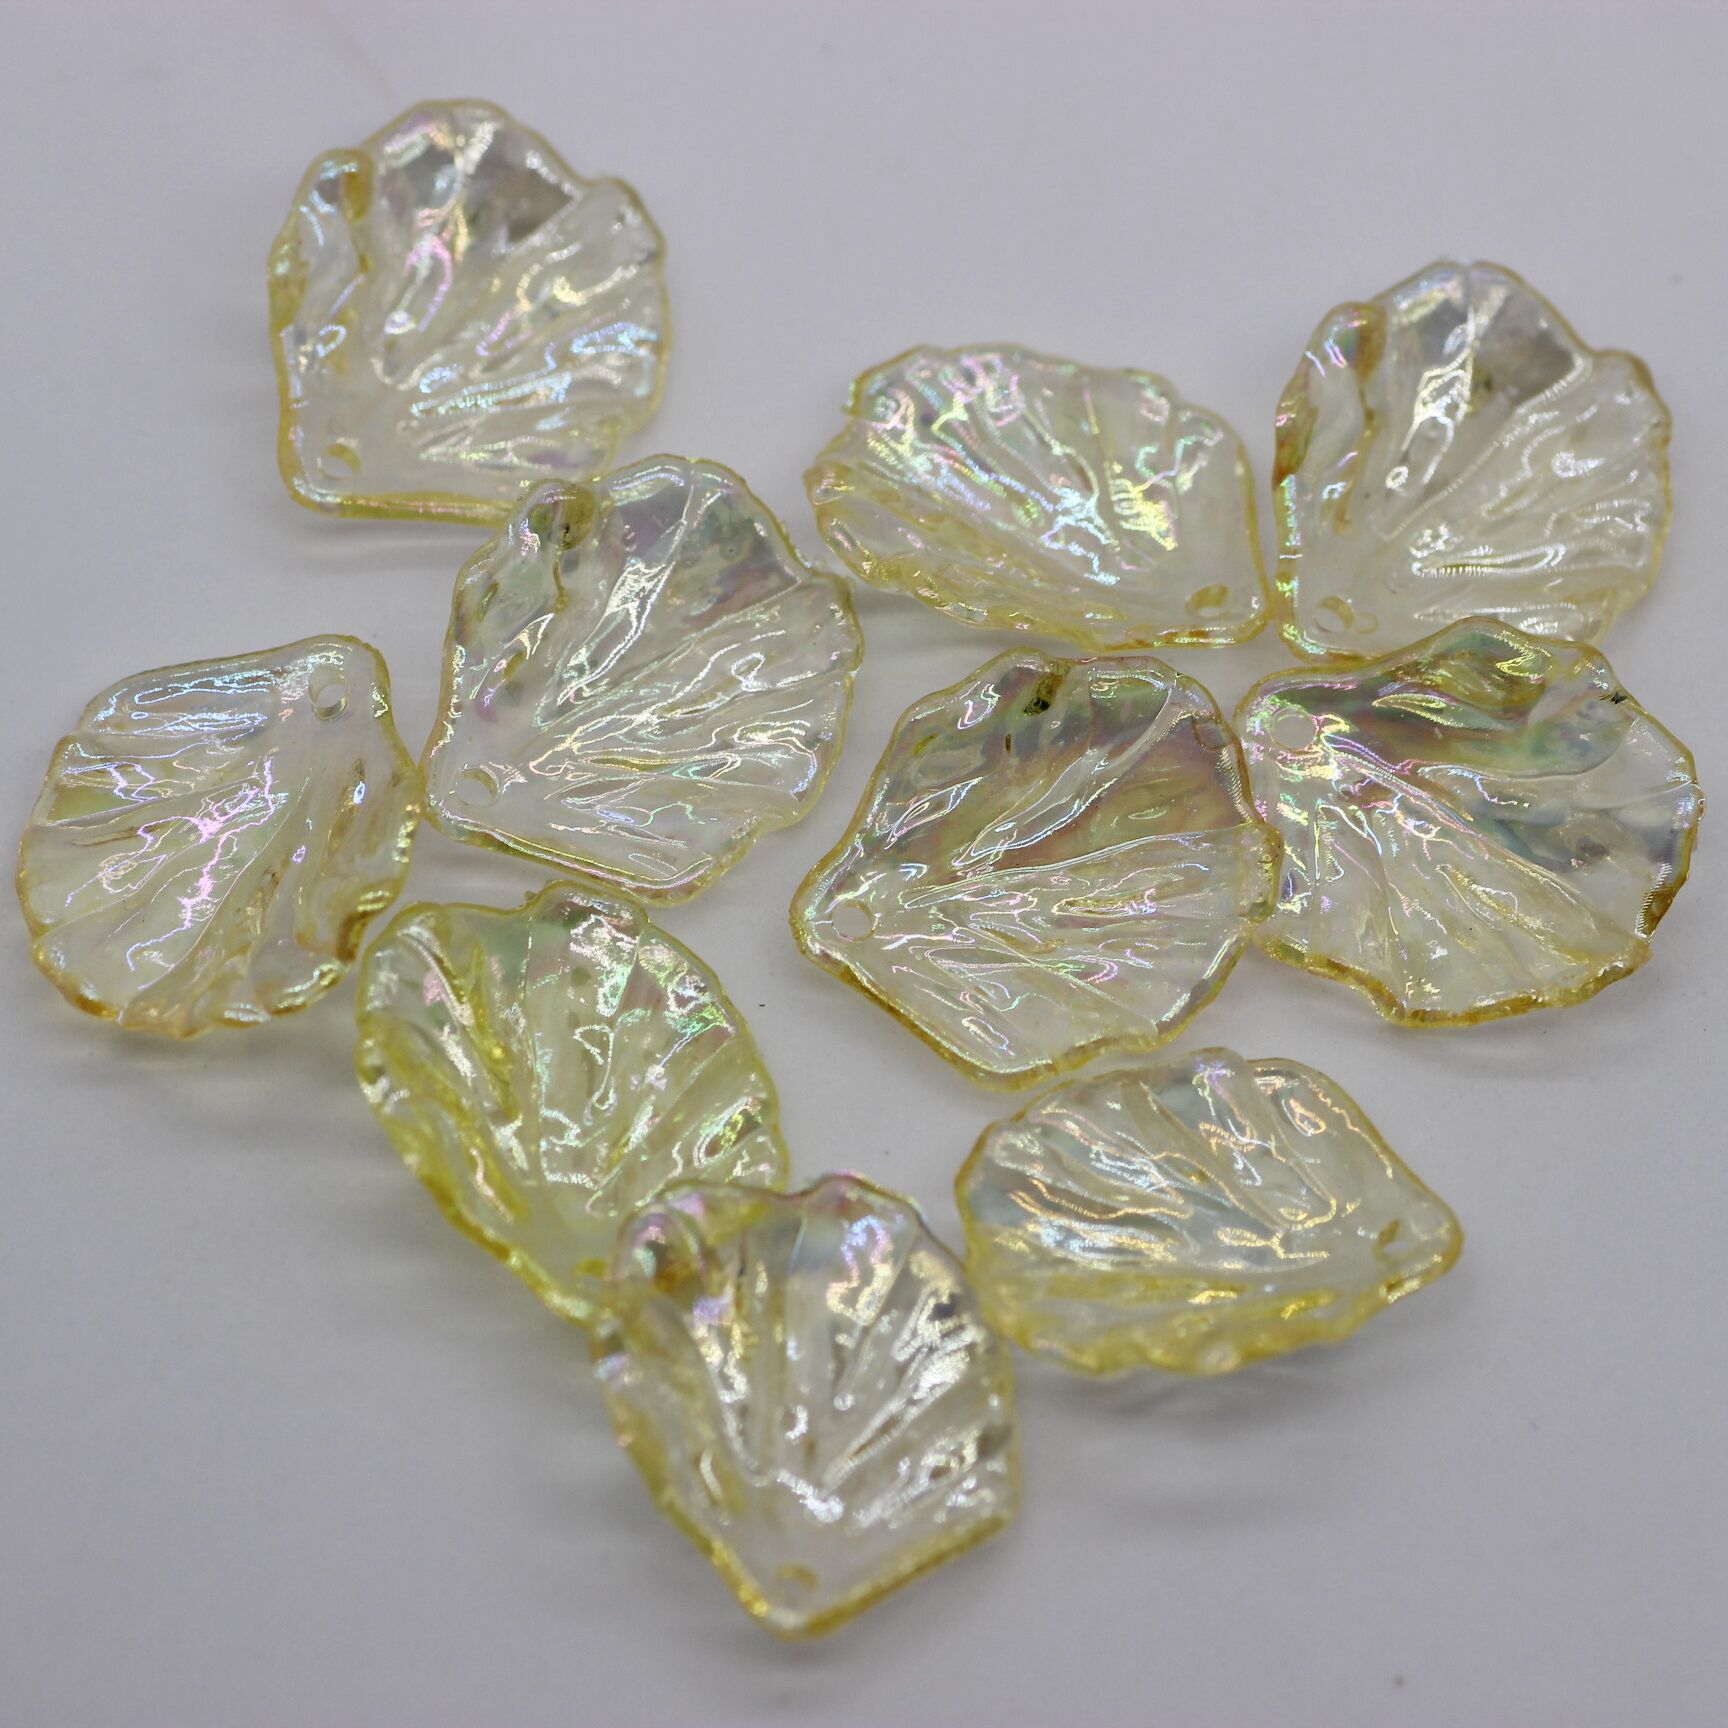 Small 15 x 17 mm transparent yellow